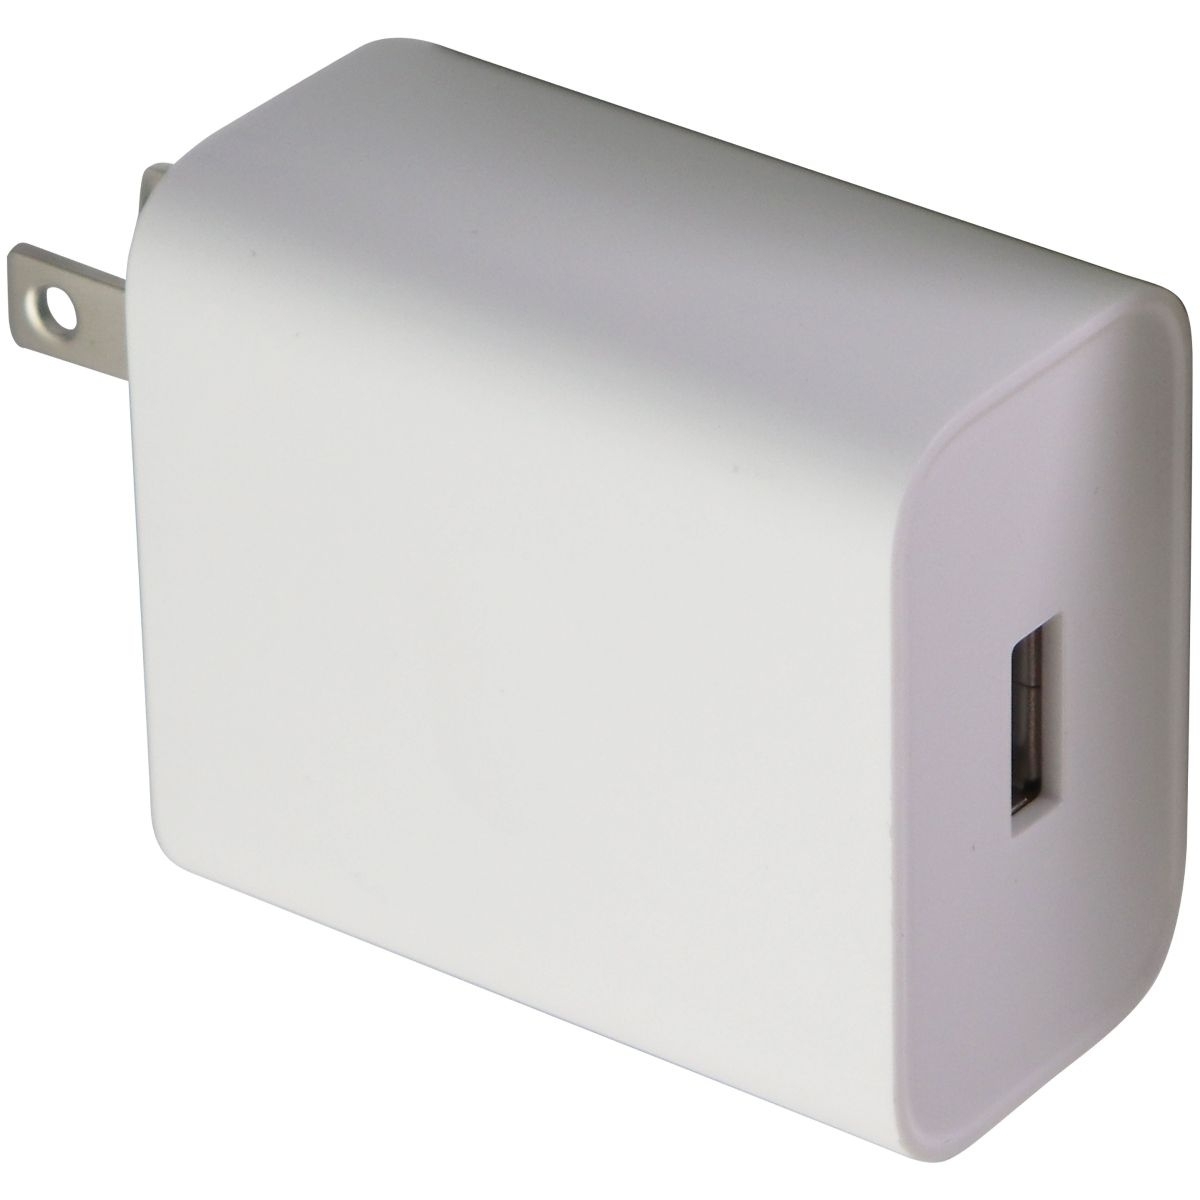 OnePlus USB Power Supply Unit Wall Charger Travel Adapter (WC018A51JH) - White